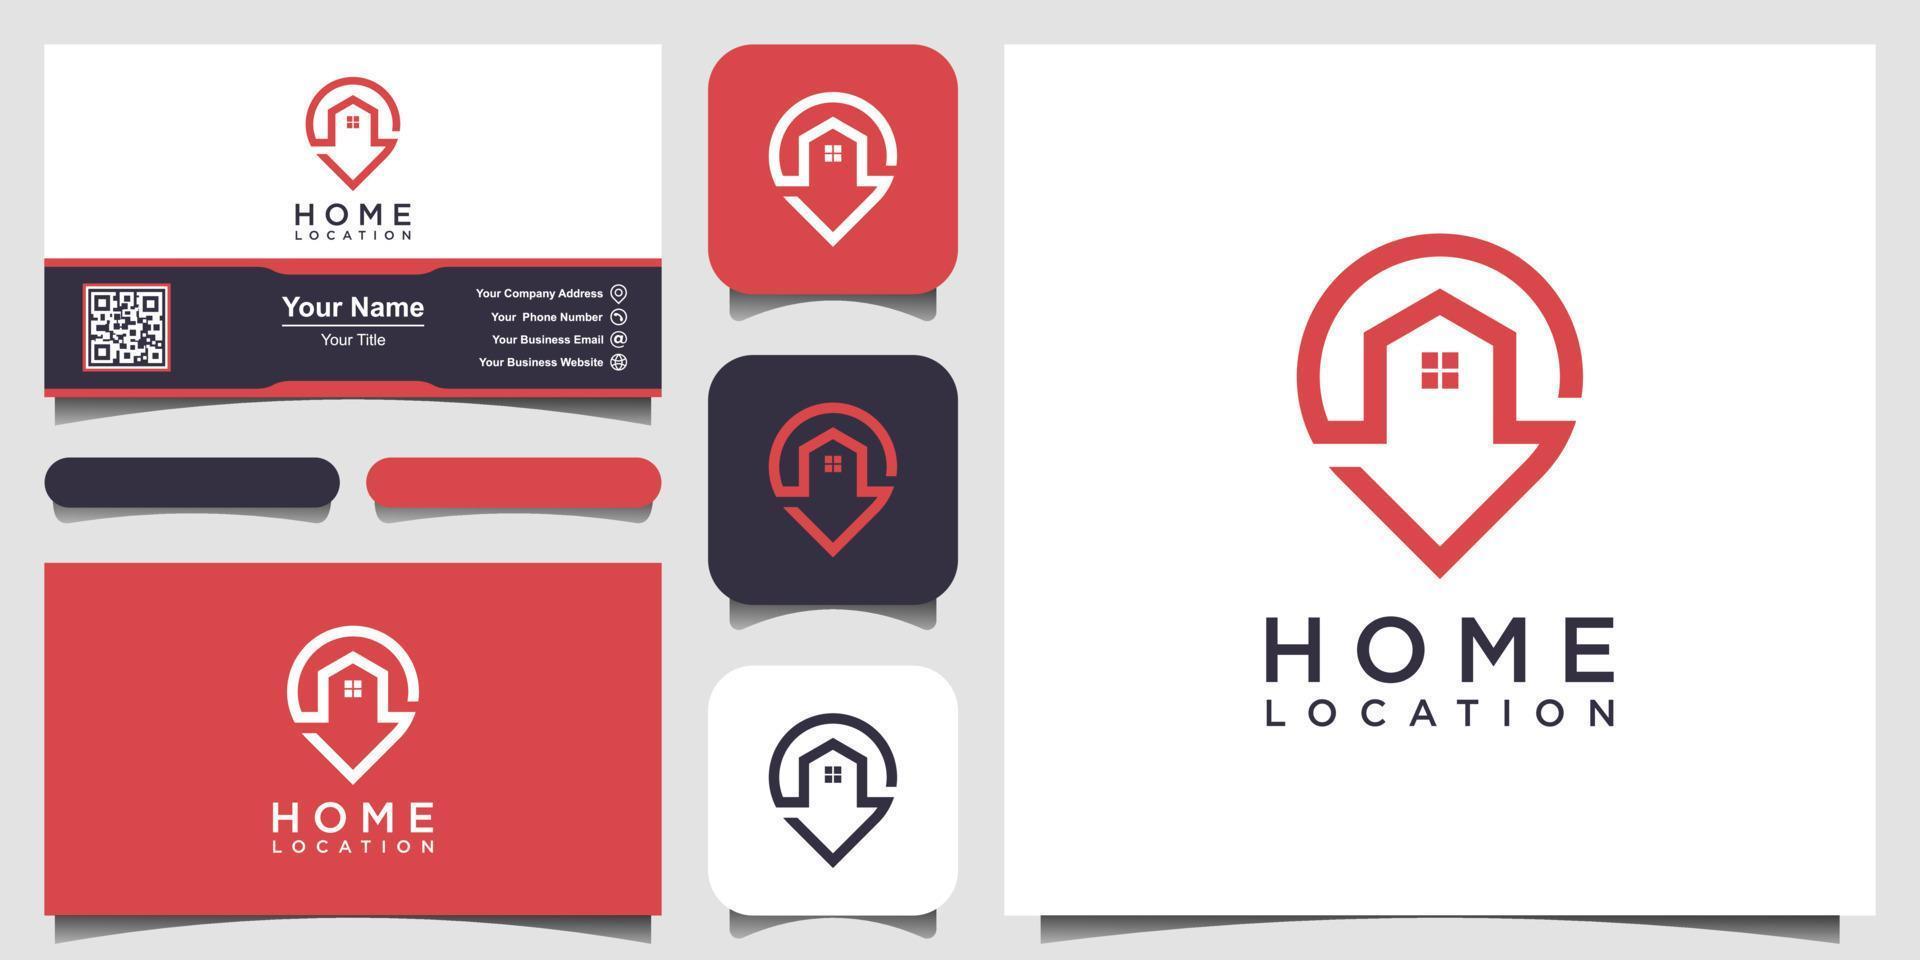 Home location Logo designs Template. house combined with pin maps sign. vector